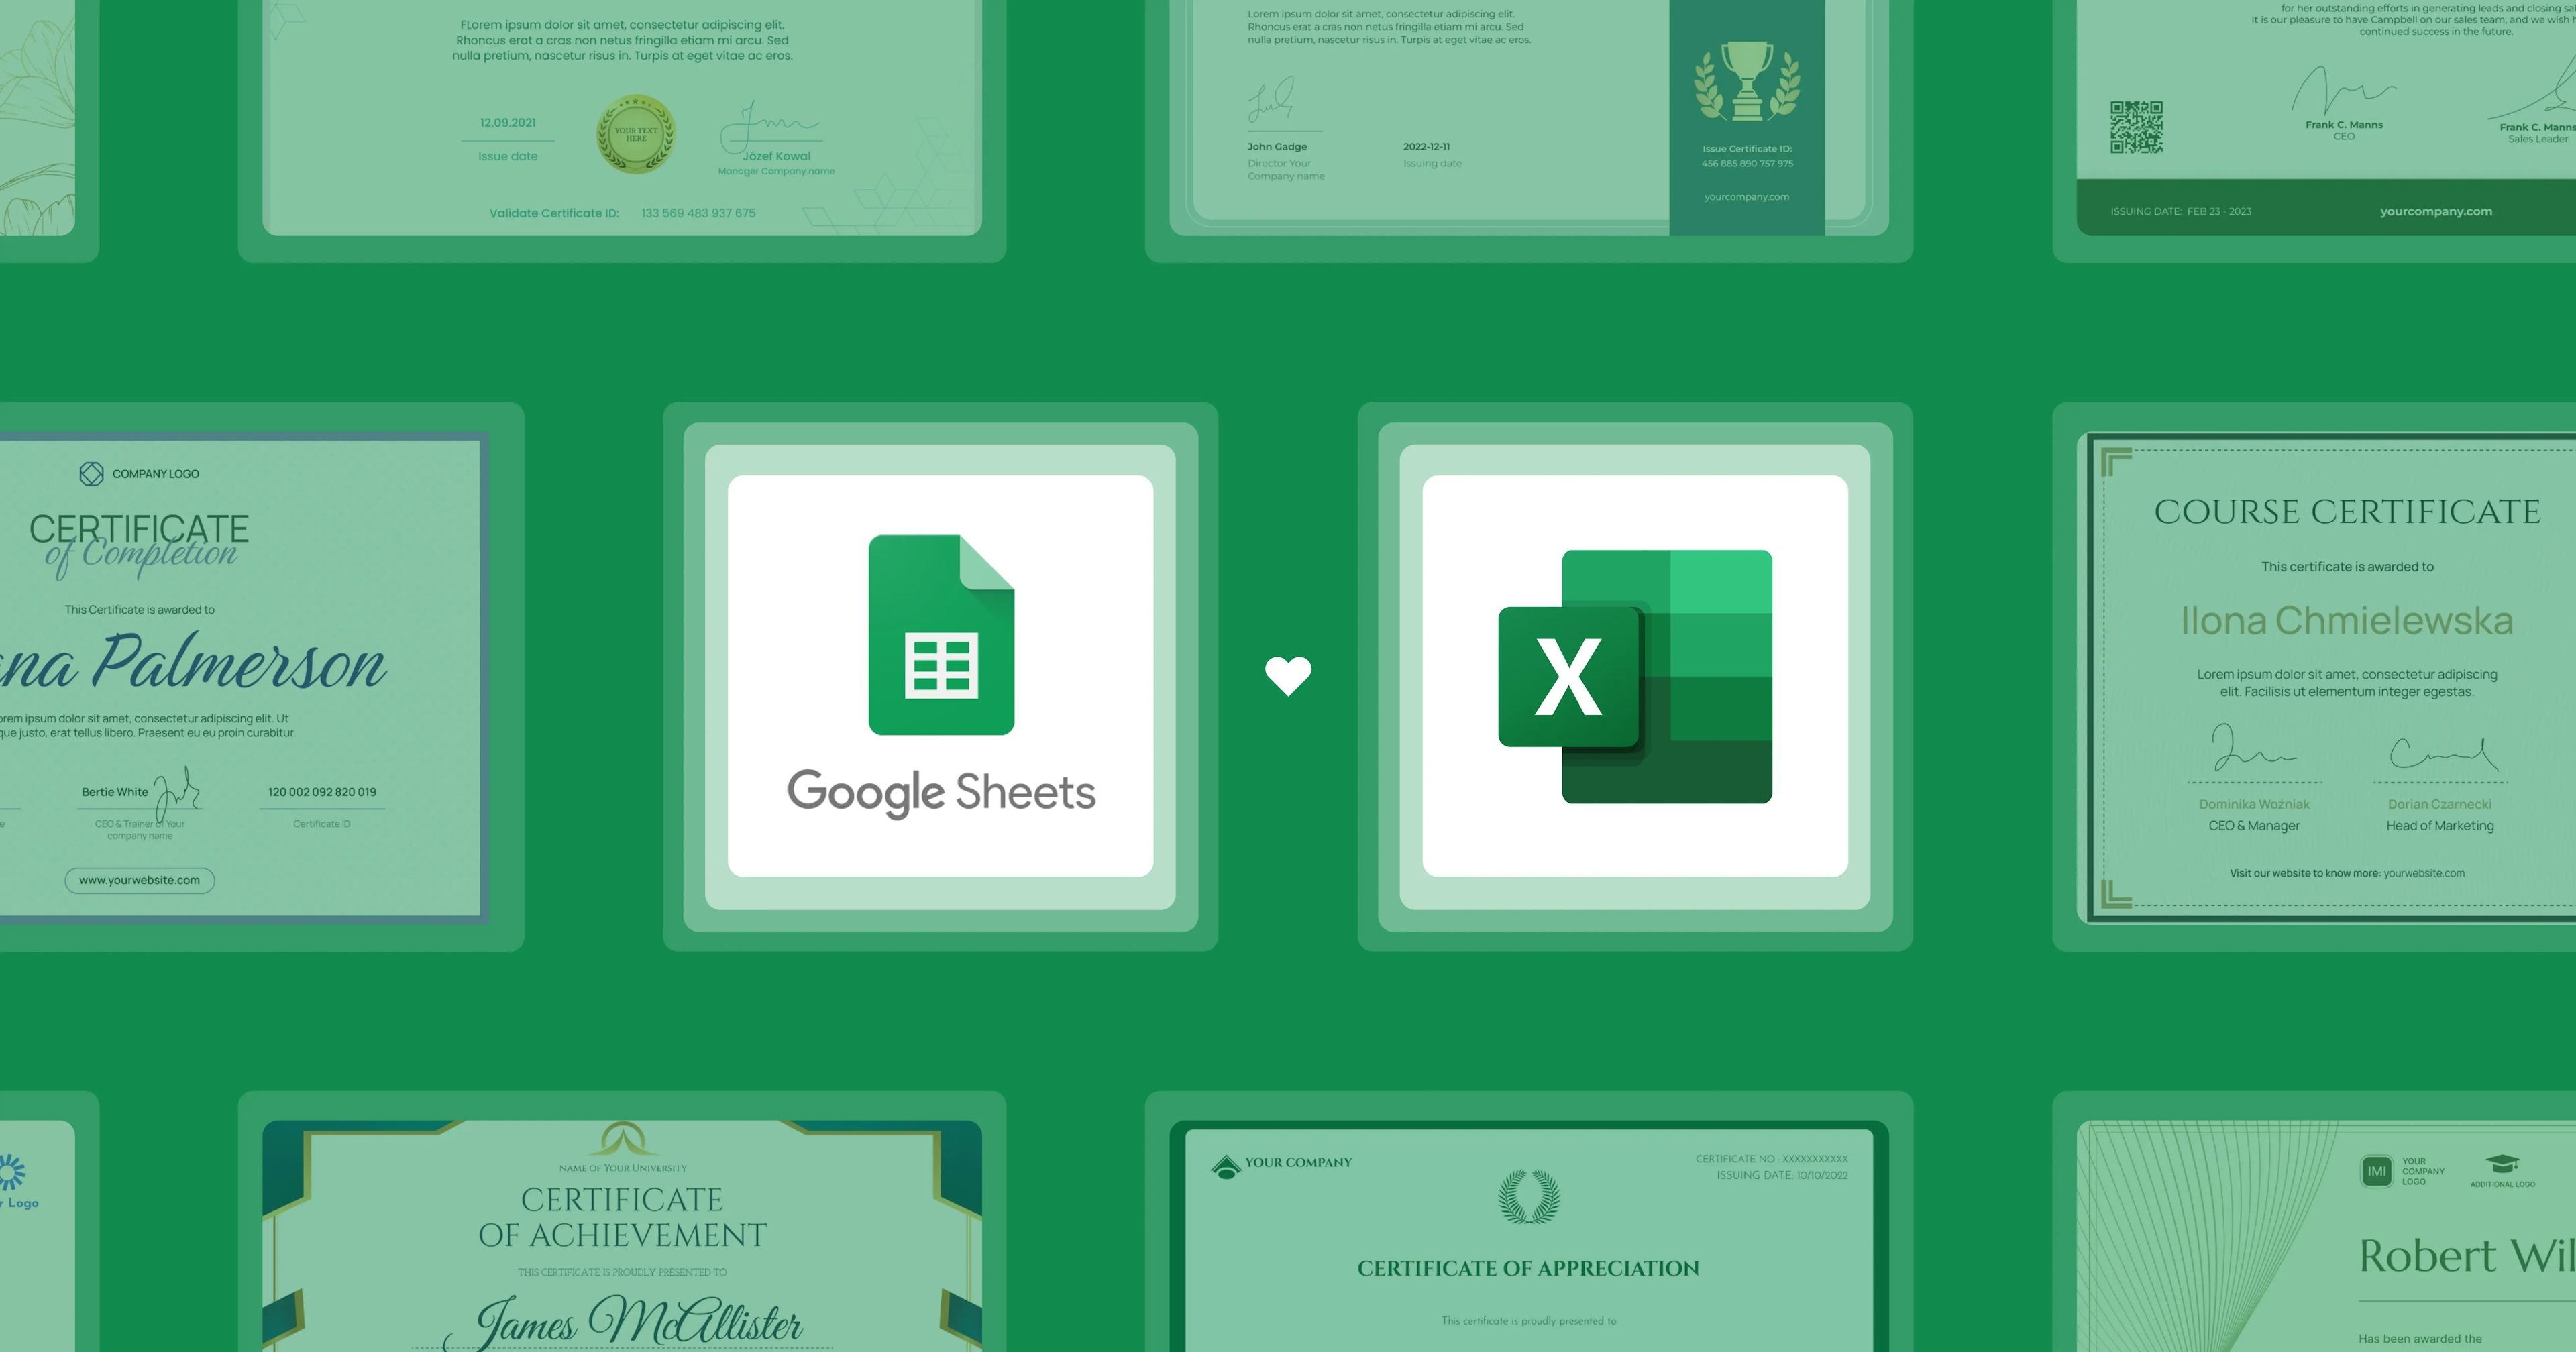 How to Create Certificates from Google Sheets and Excel? cover image